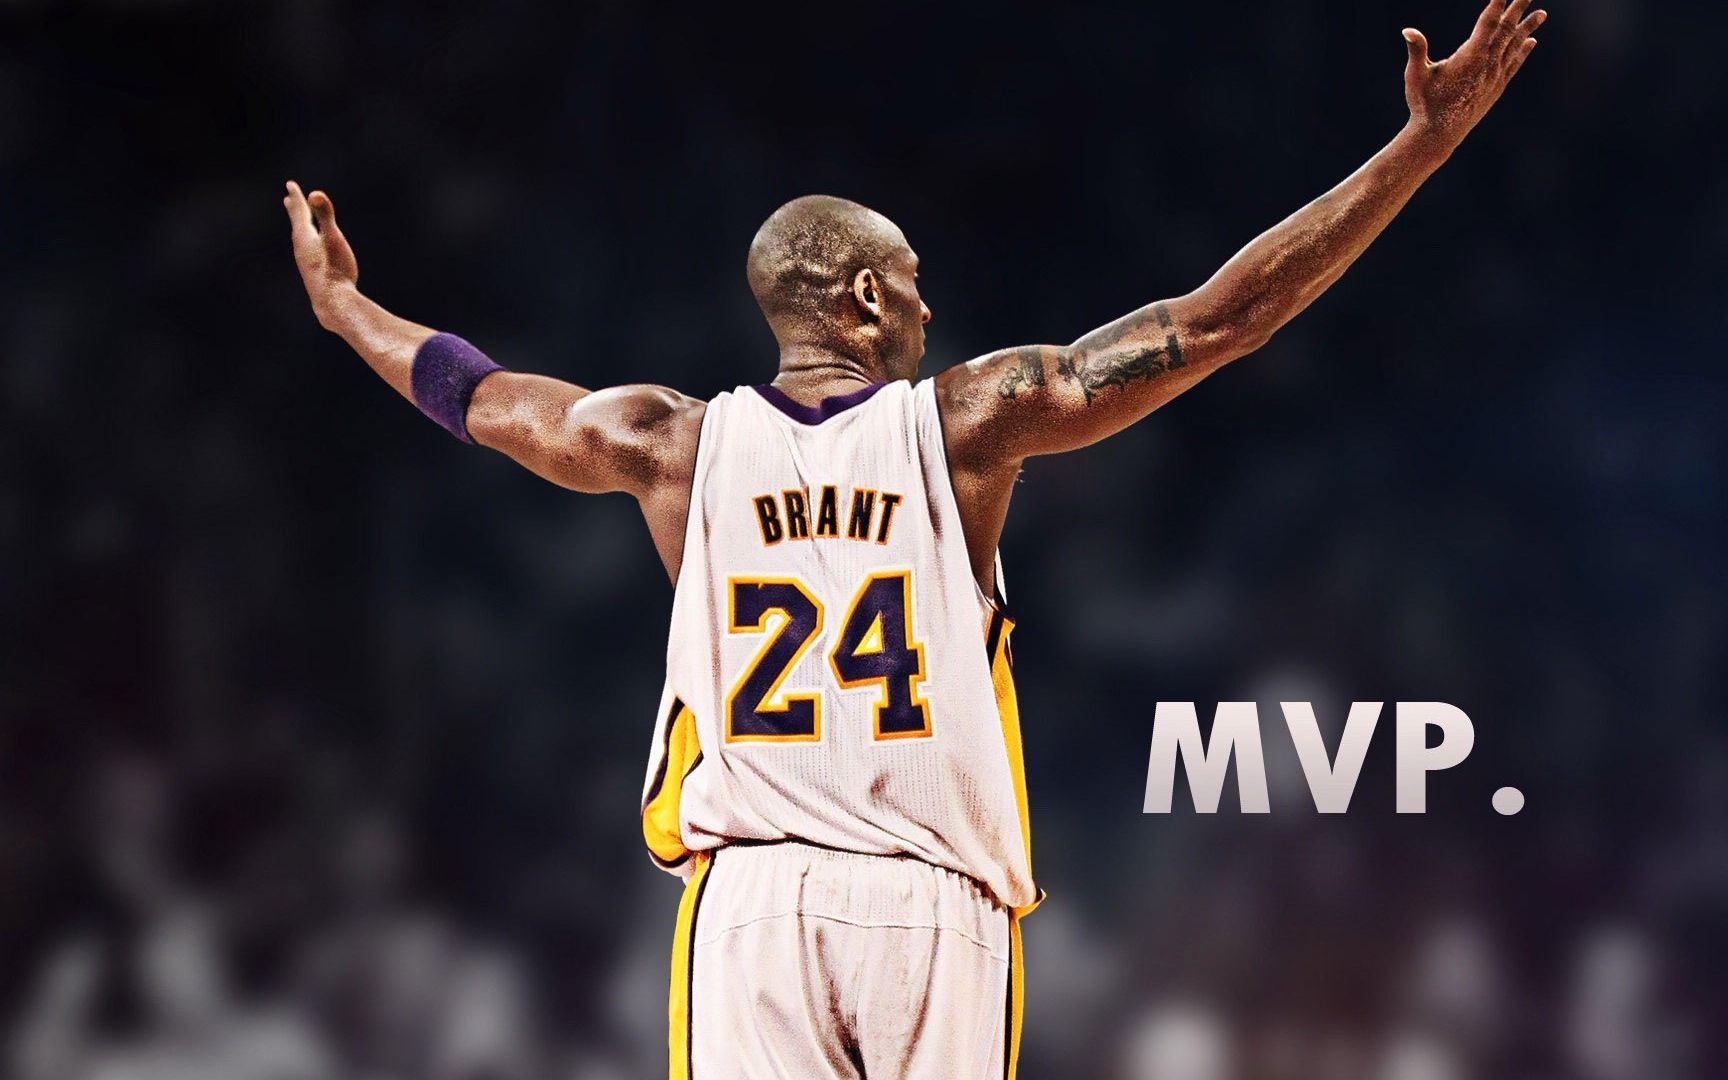 A Legend Leaves The Sport of Basketball: Kobe Bryant Announces His Retirement After 20 Years ...